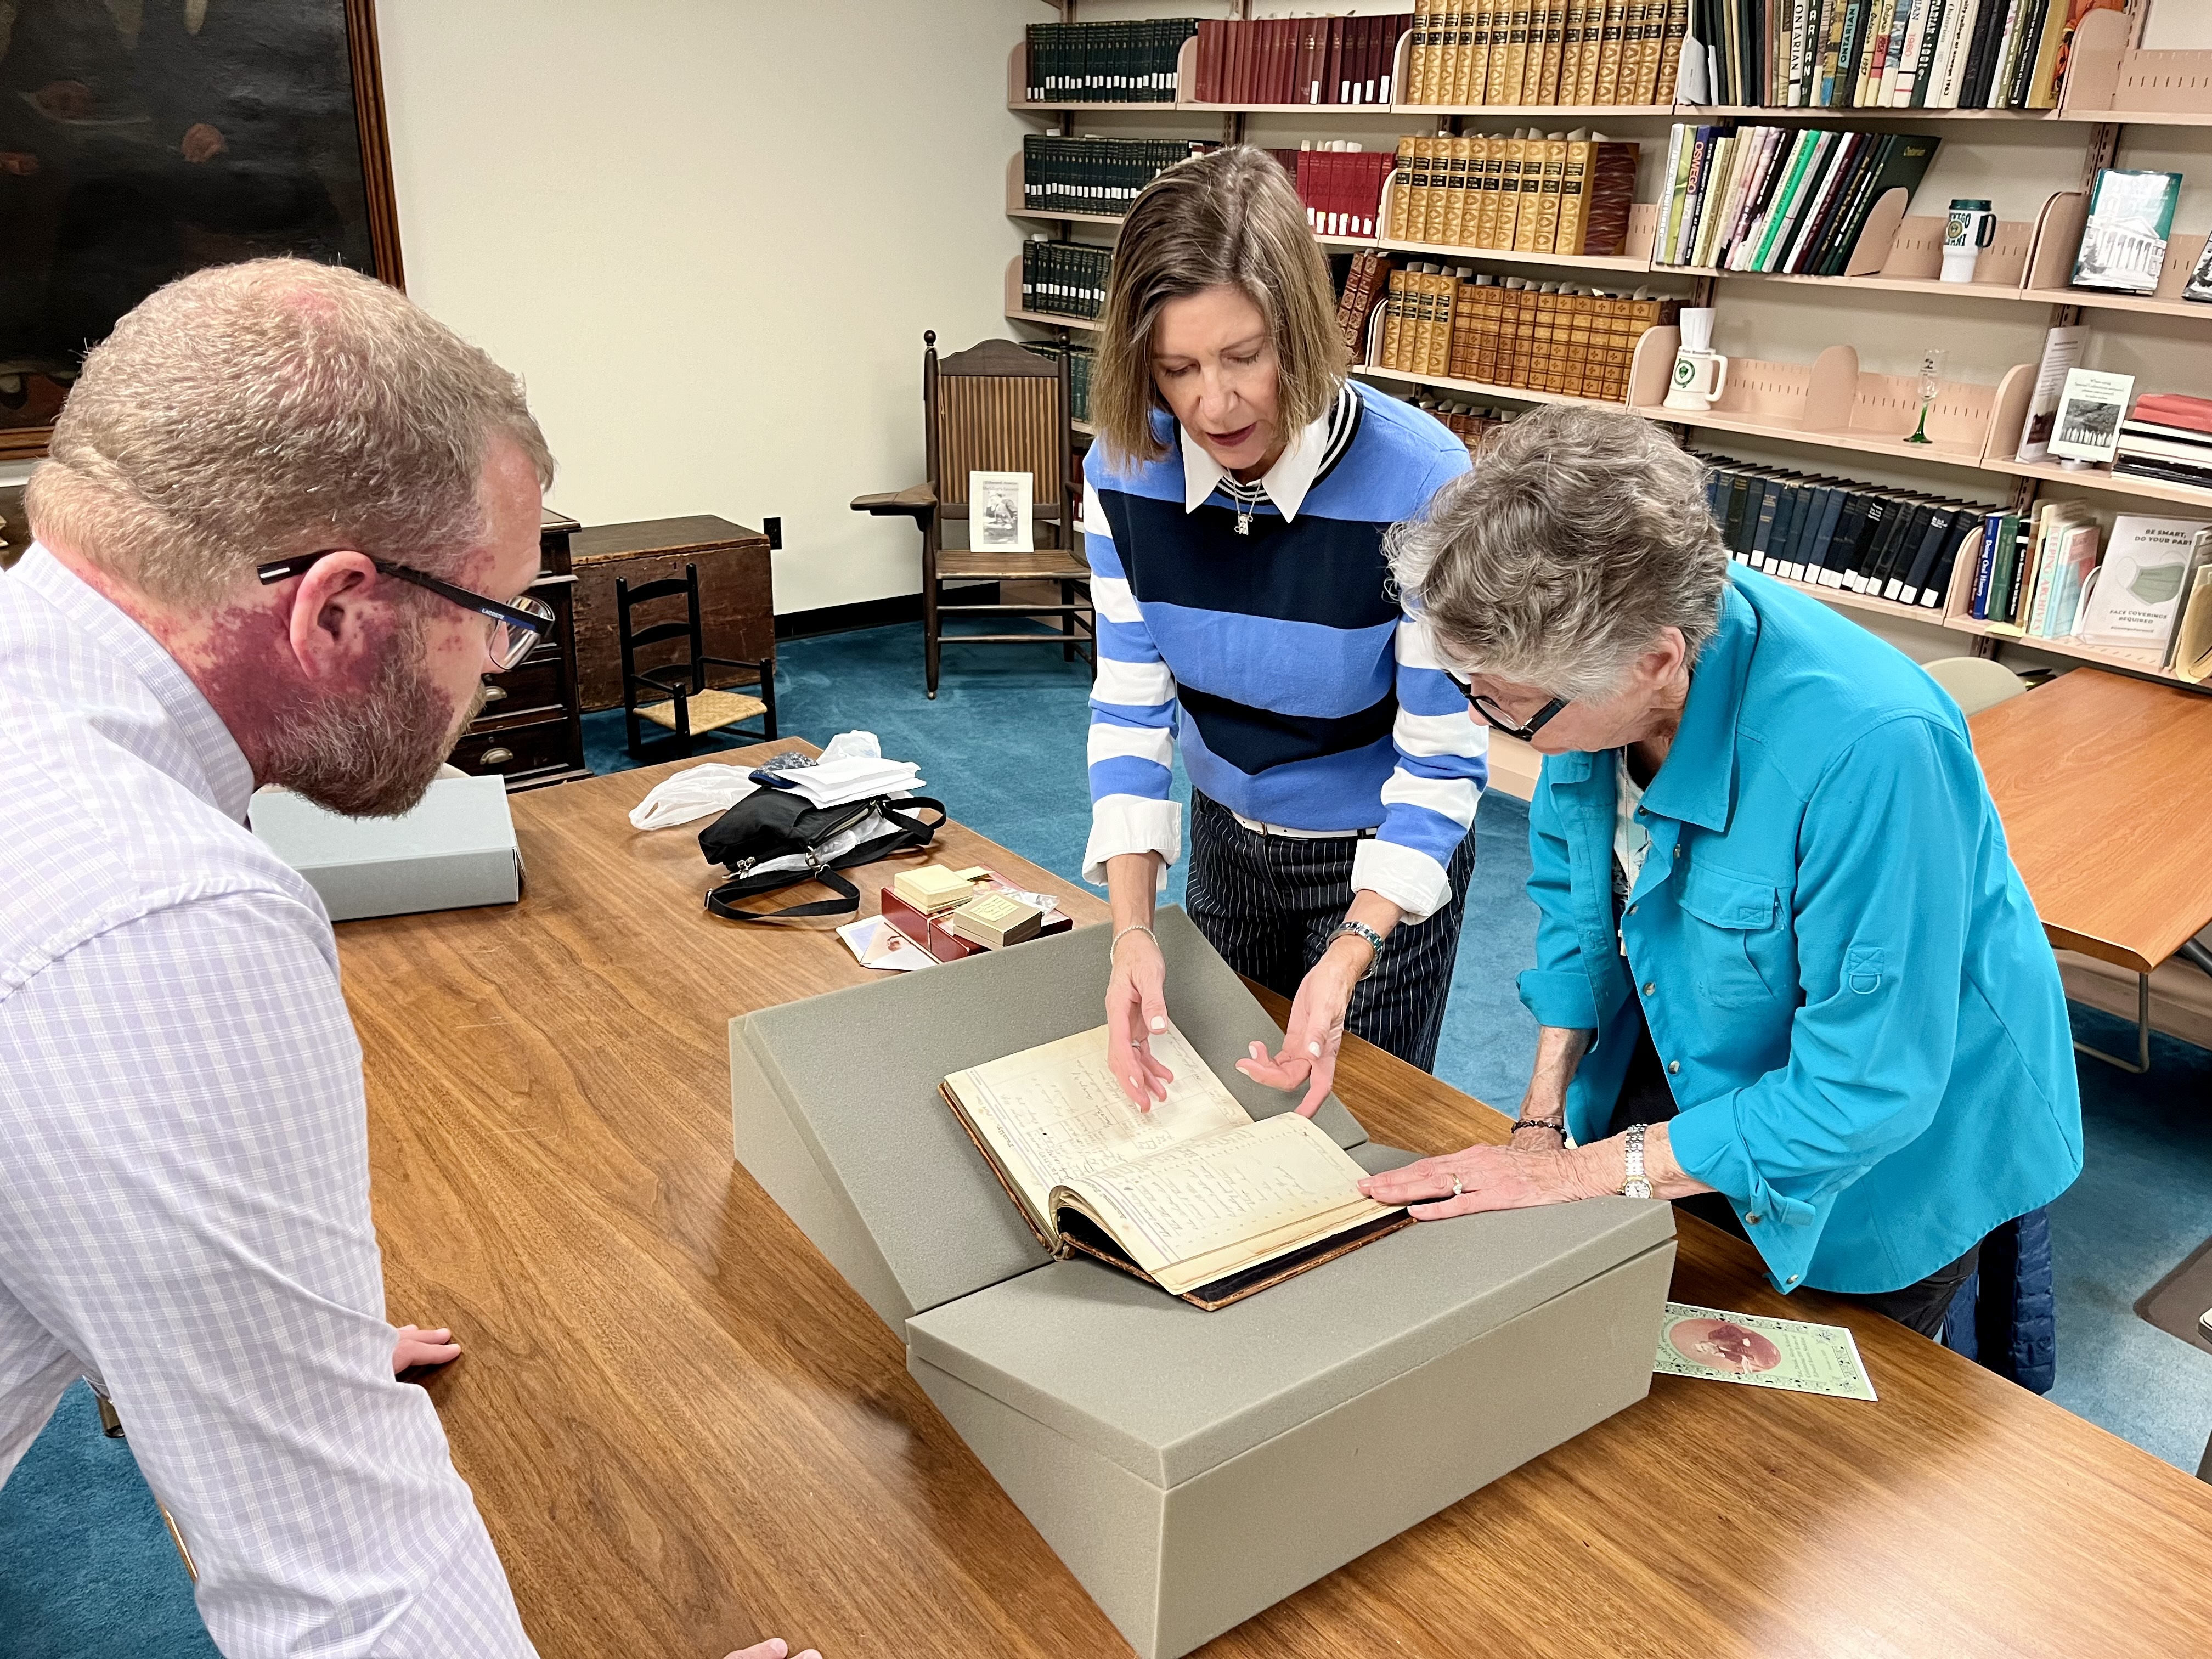 Two descendants of Edward Austin Sheldon – who founded the institution now known as SUNY Oswego – visited campus last week for research and conversations. Marianna Page (right), Sheldon’s great-great granddaughter, and her daughter Dawne Pafford (center) traveled from Illinois and Wisconsin, respectively. Here Zachary Vickery, university archivist librarian, shows them a recently discovered ancestral registry and Sheldon family ledger in Penfield Library’s Archives and Special Collections.